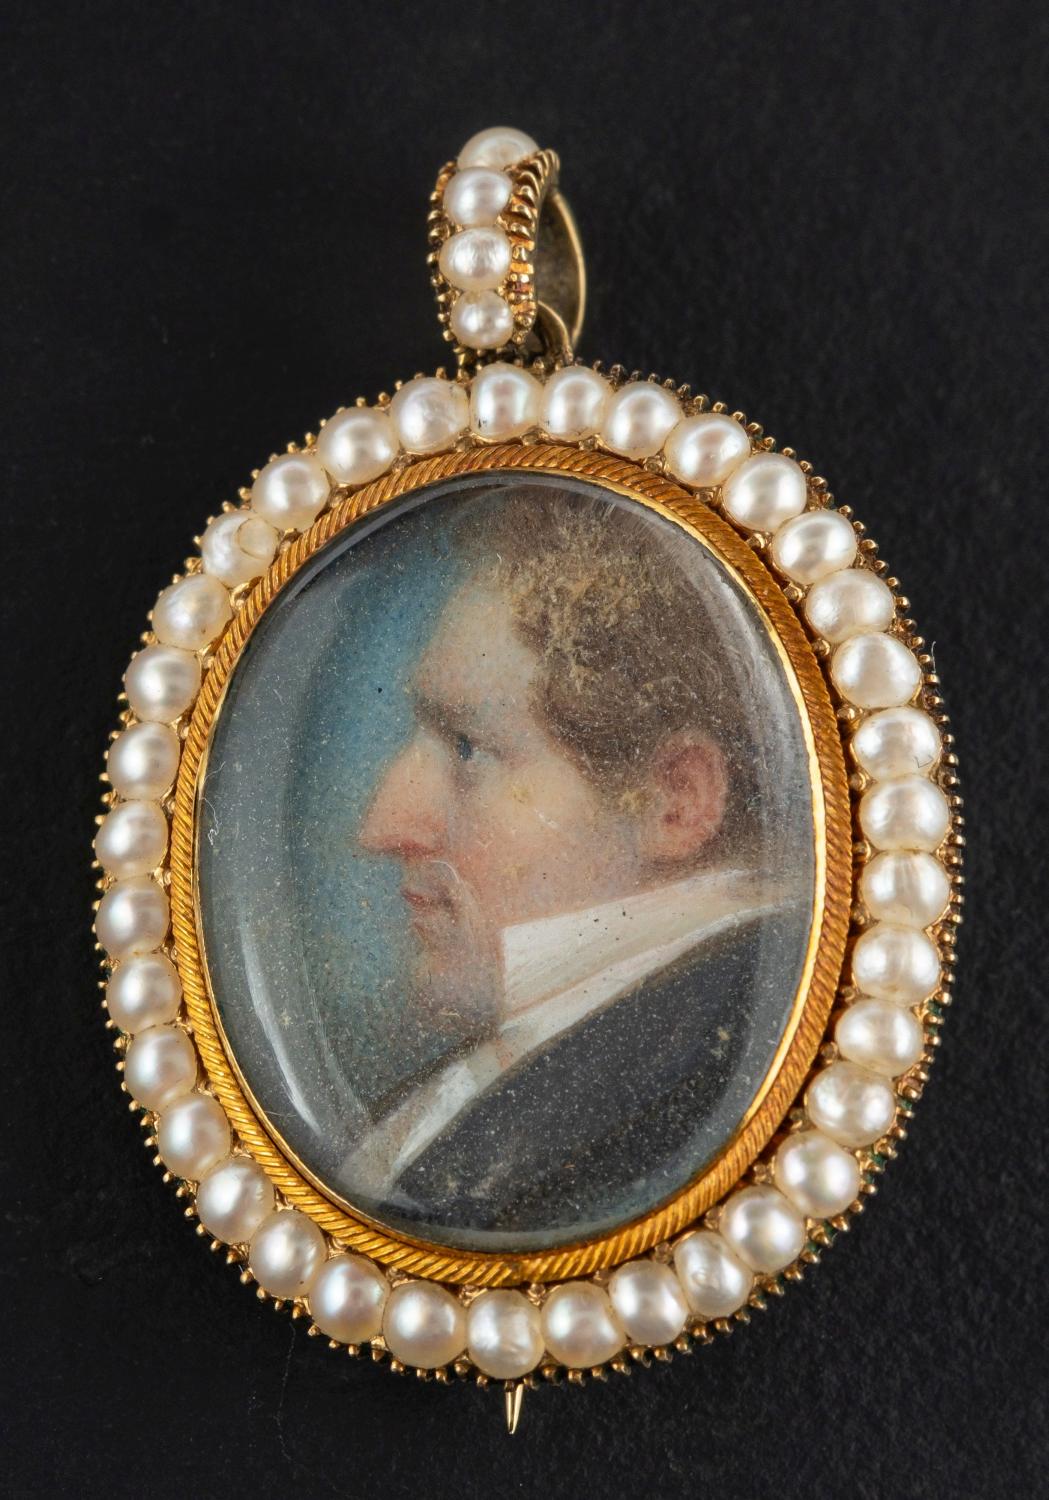 An early 19th century portrait miniature pendant/ brooch, watercolour on ivory,